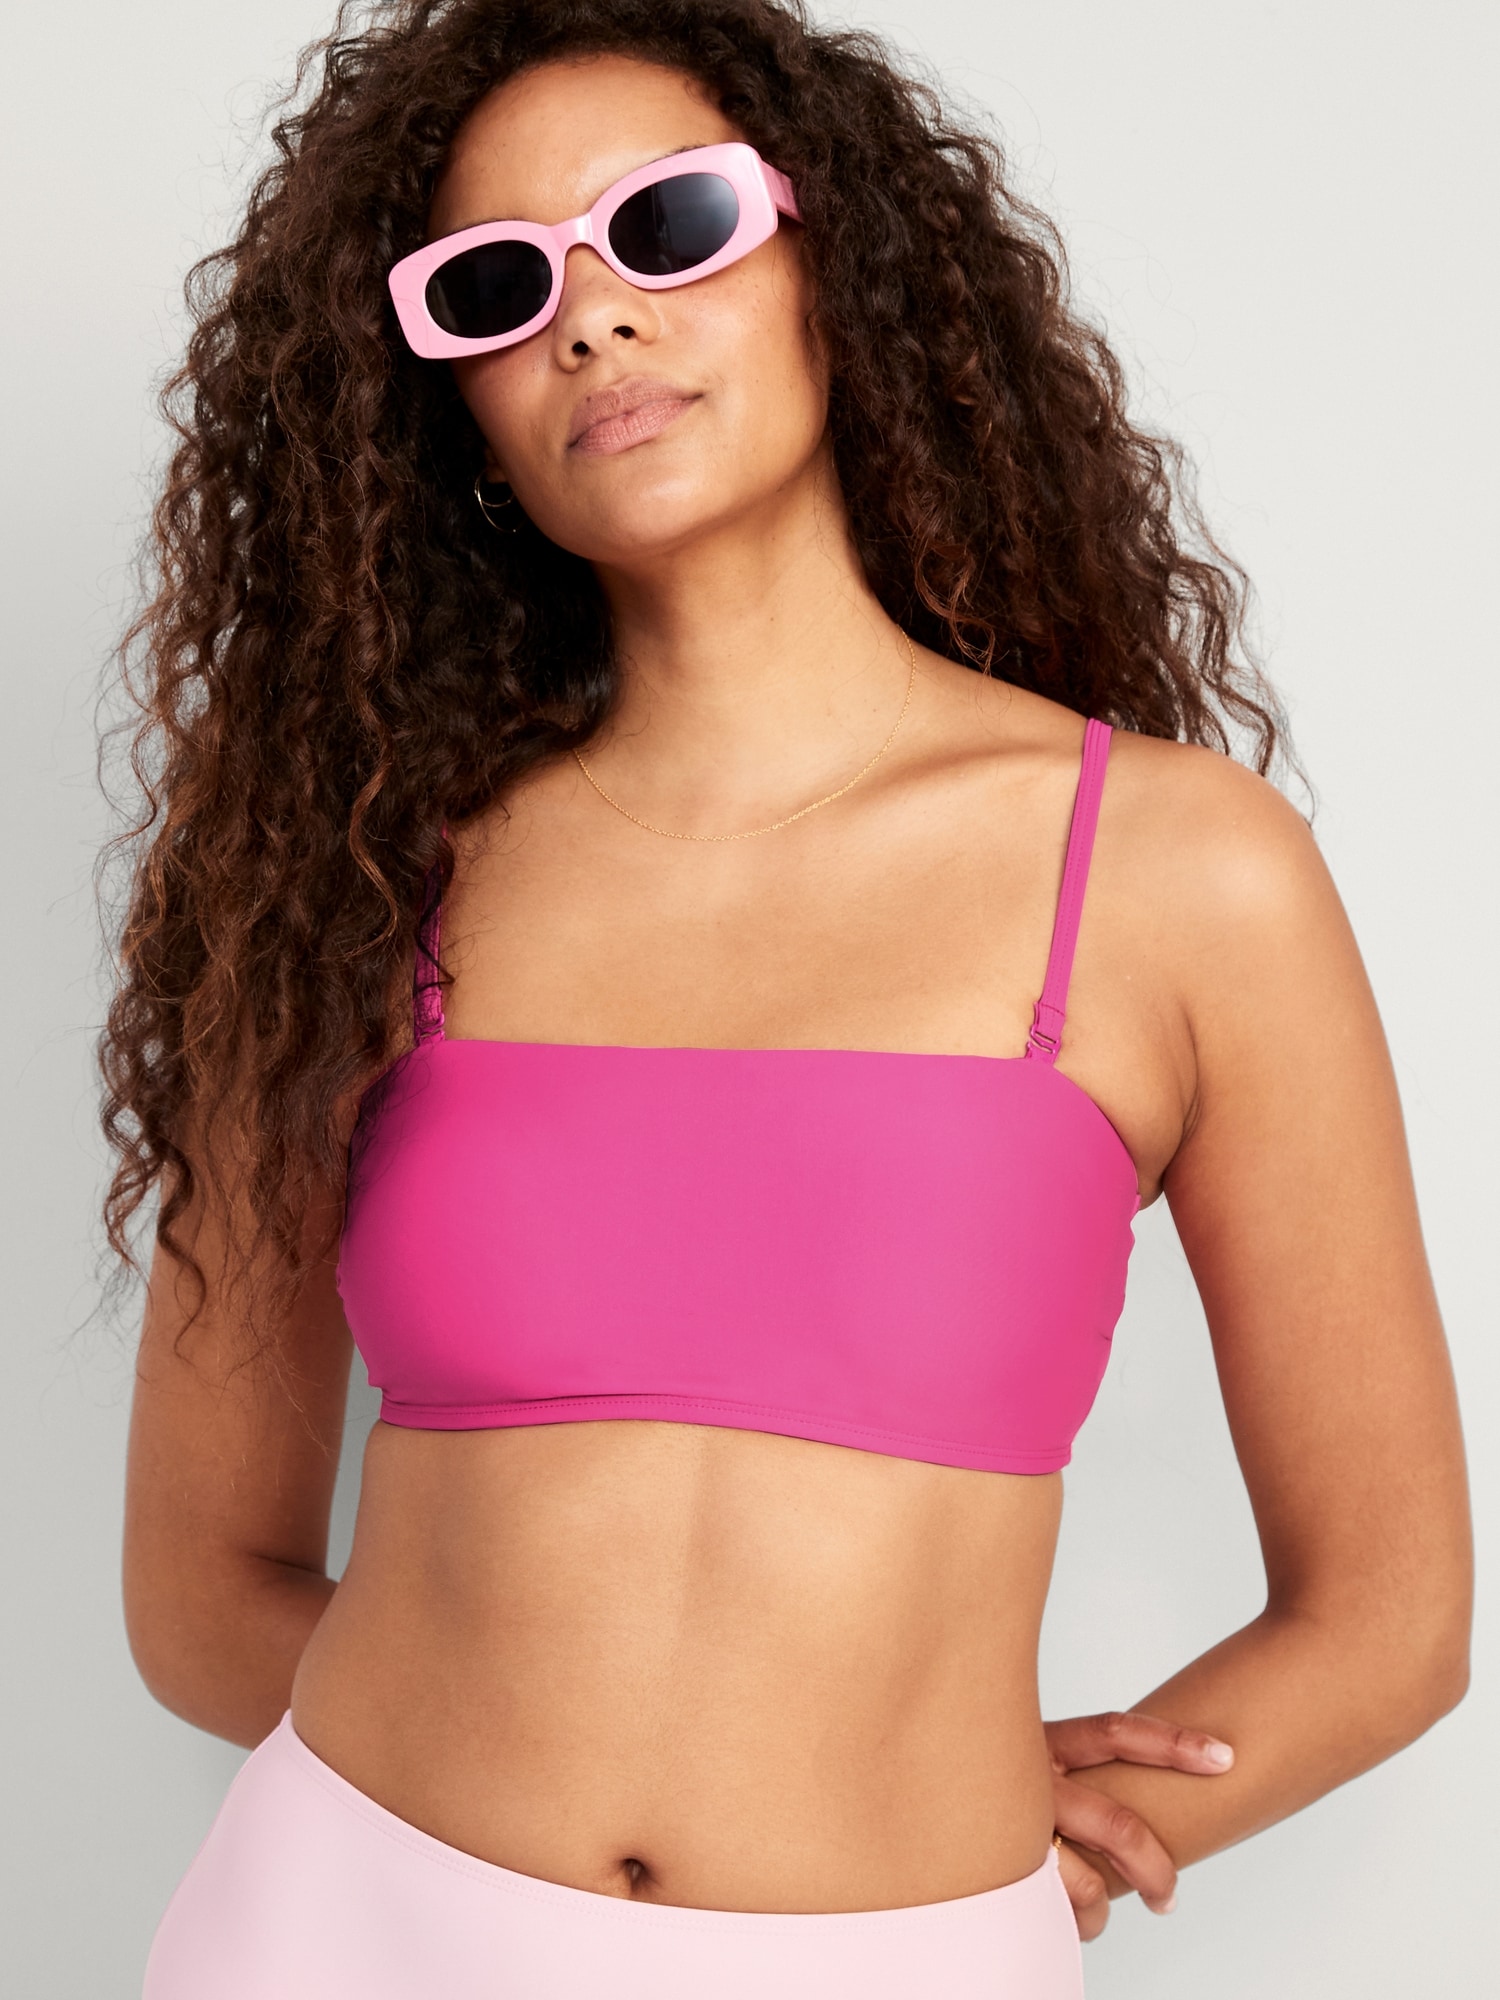 Old Navy Bandeau Swim Top for Women pink. 1